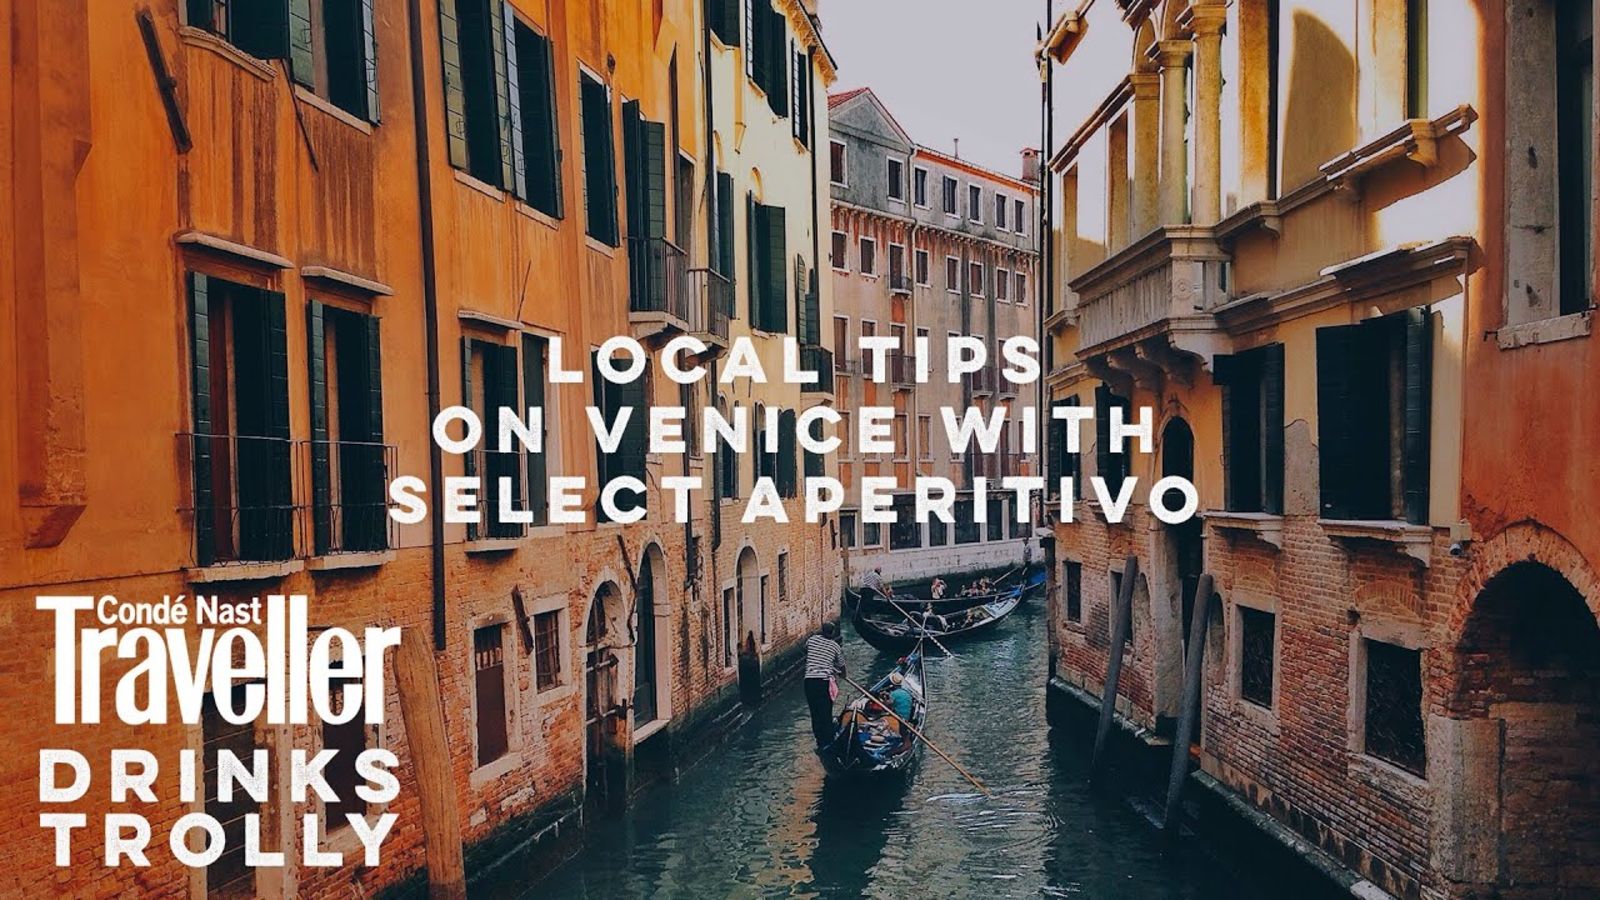 Venice tips from locals with Select Aperitivo